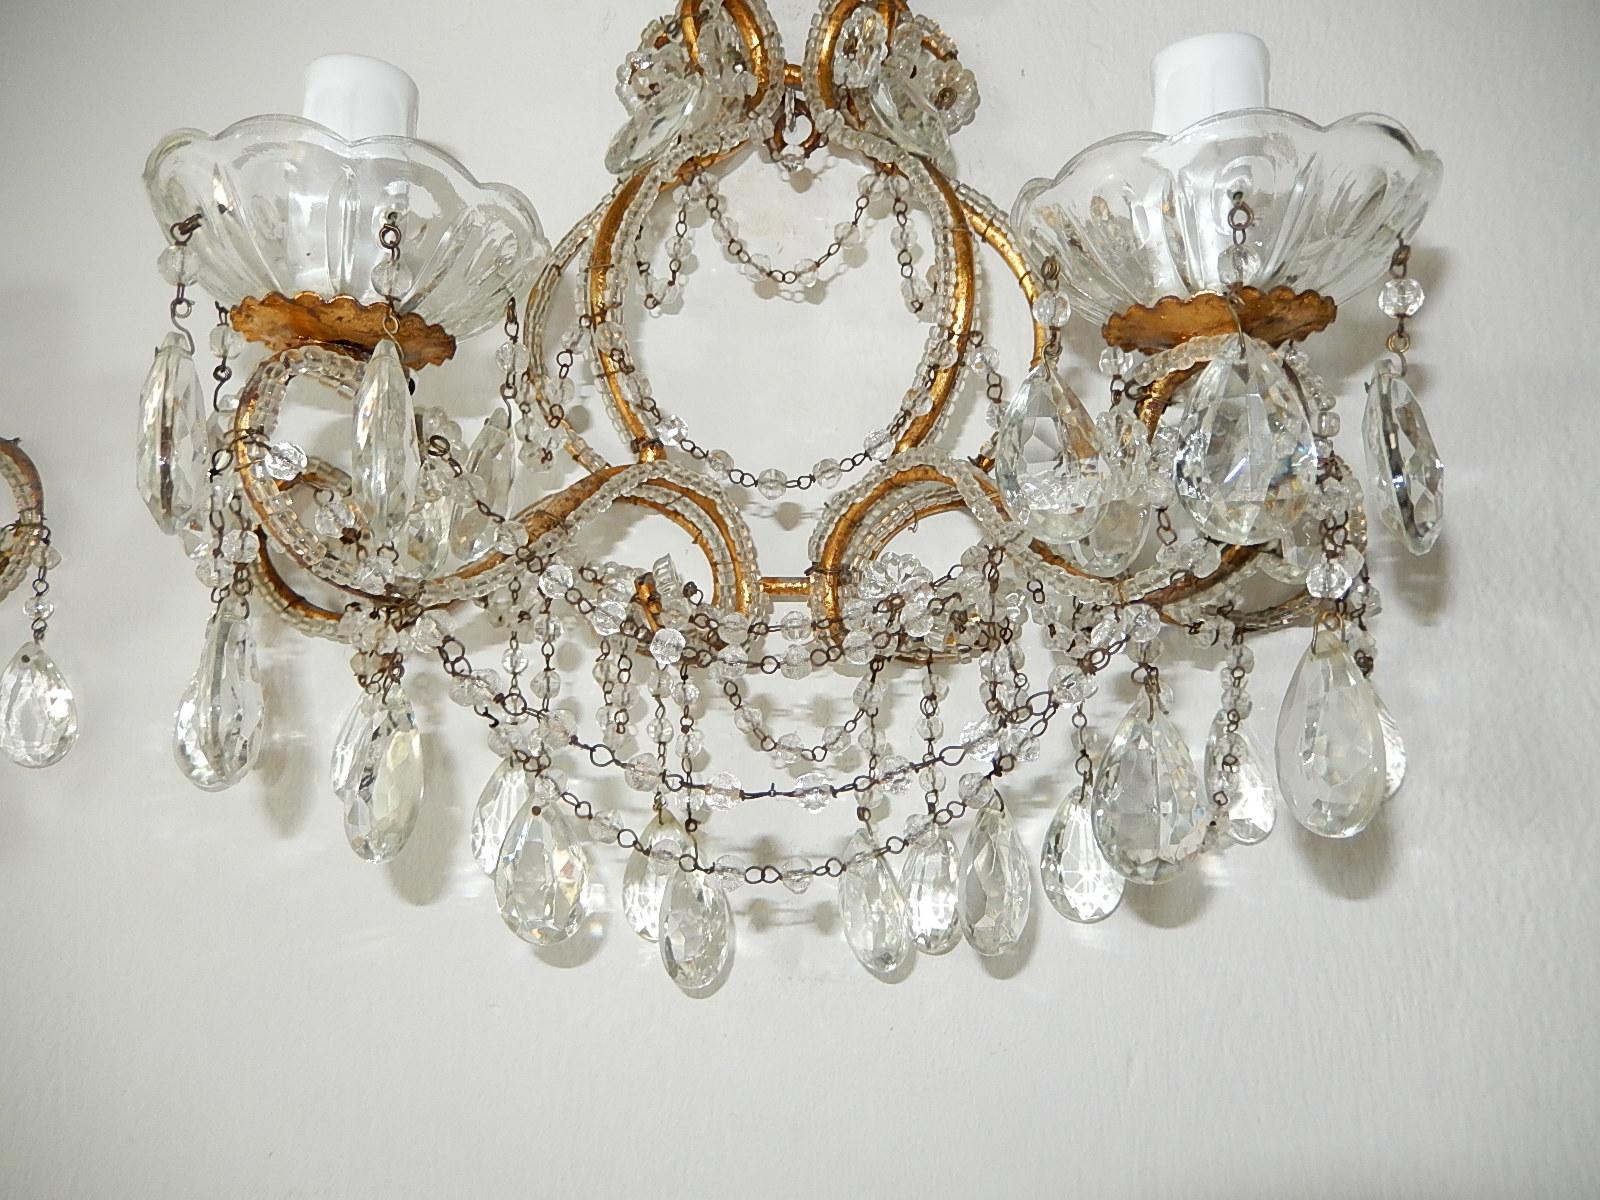 1900 Italian Rococo Beaded Crystal Prisms Gold Gilt Sconces For Sale 3